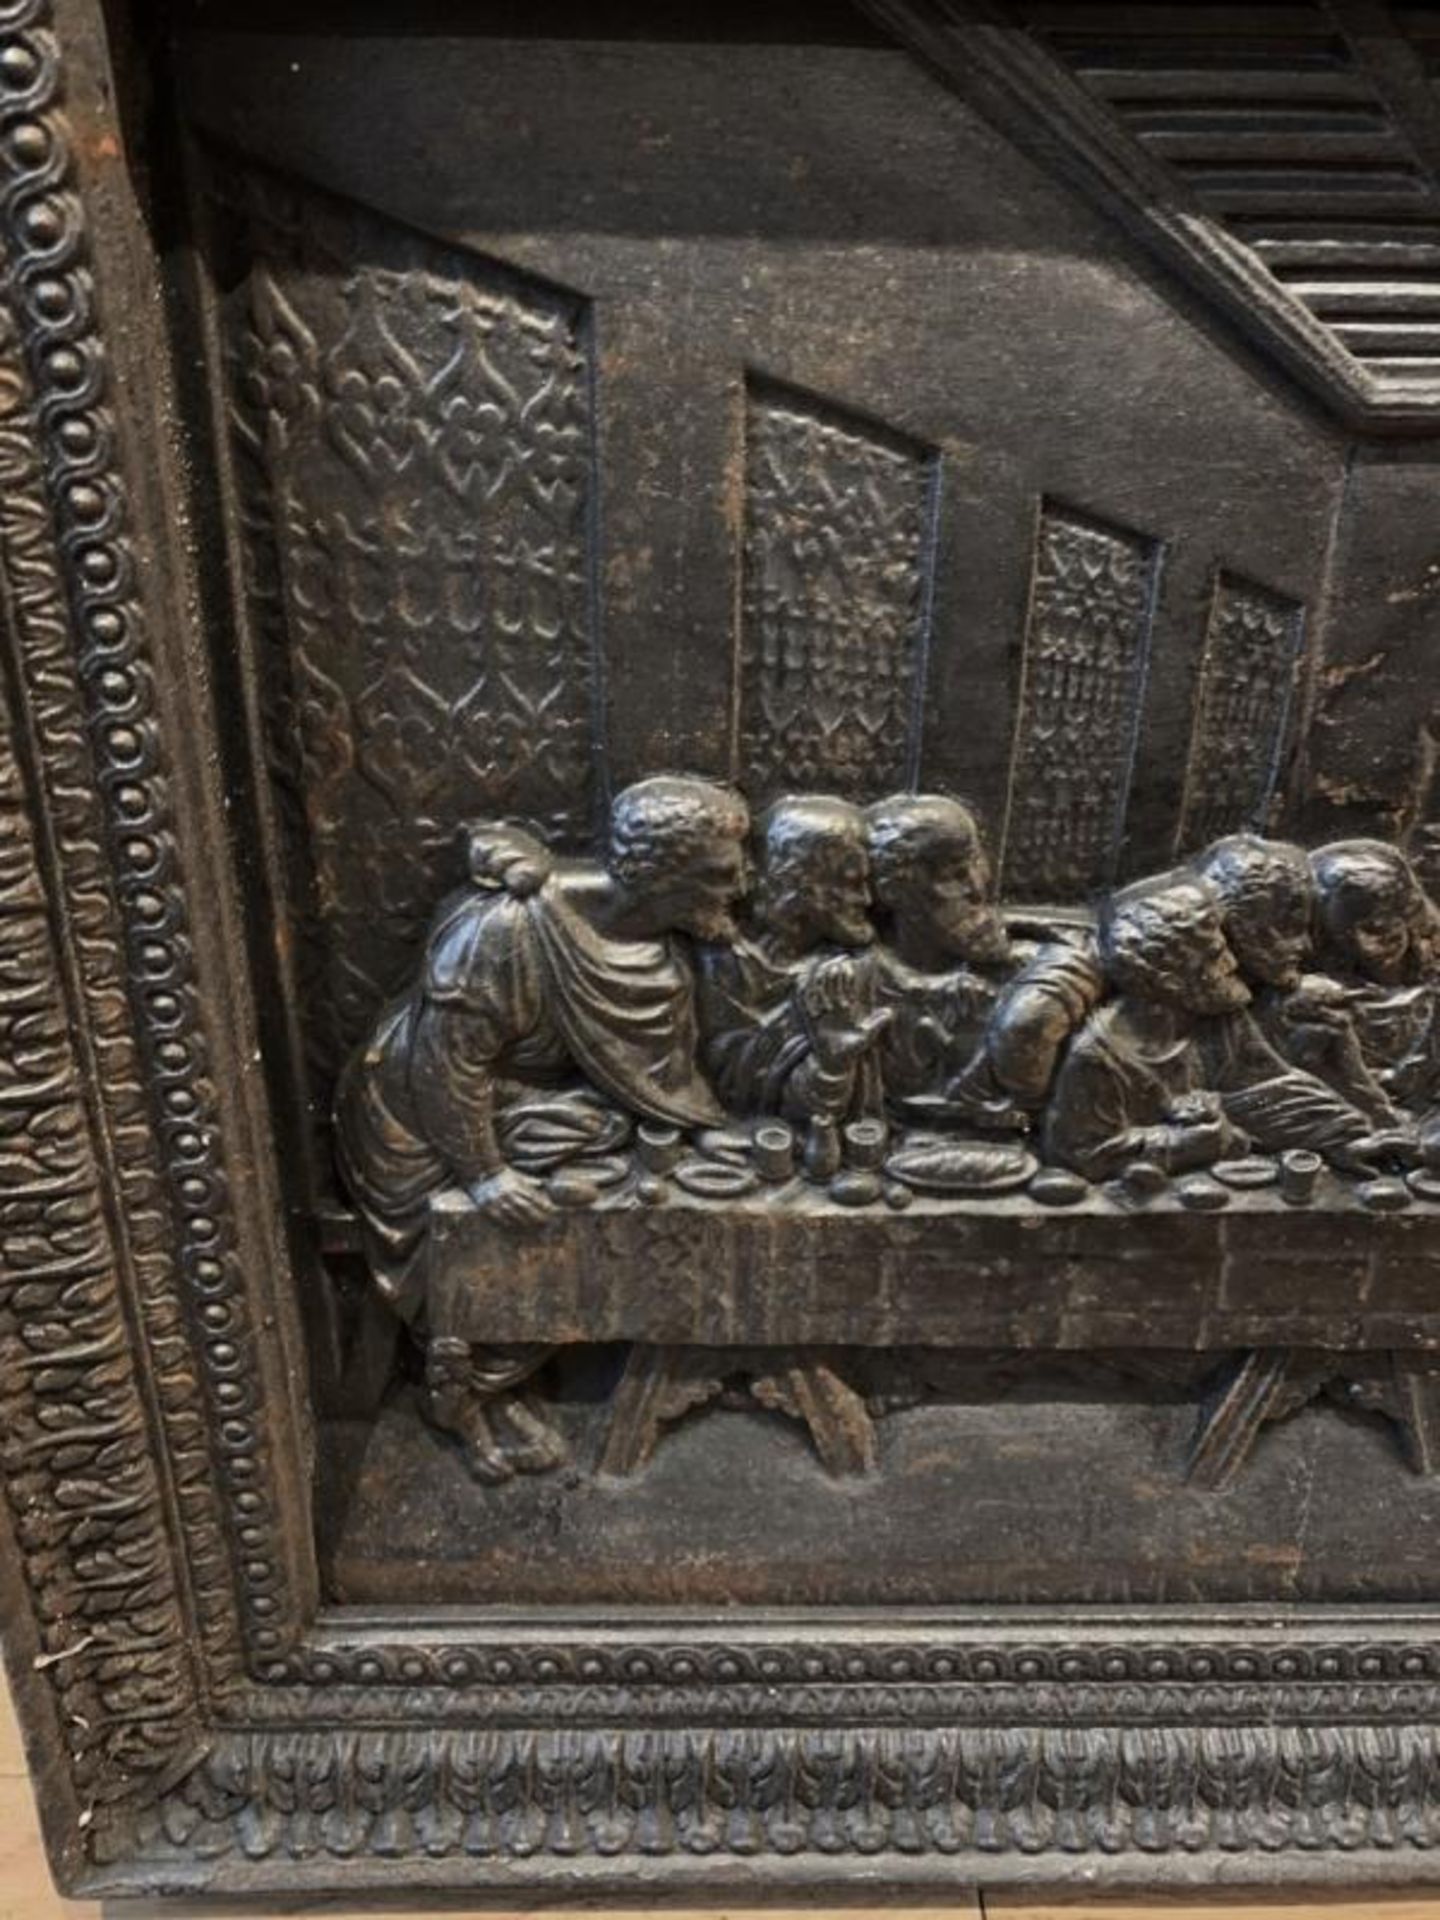 1 x Heavy Solid Cast Iron Rectangular Sculpture Featuring The Famous 'Last Supper' Scene - - Image 11 of 14